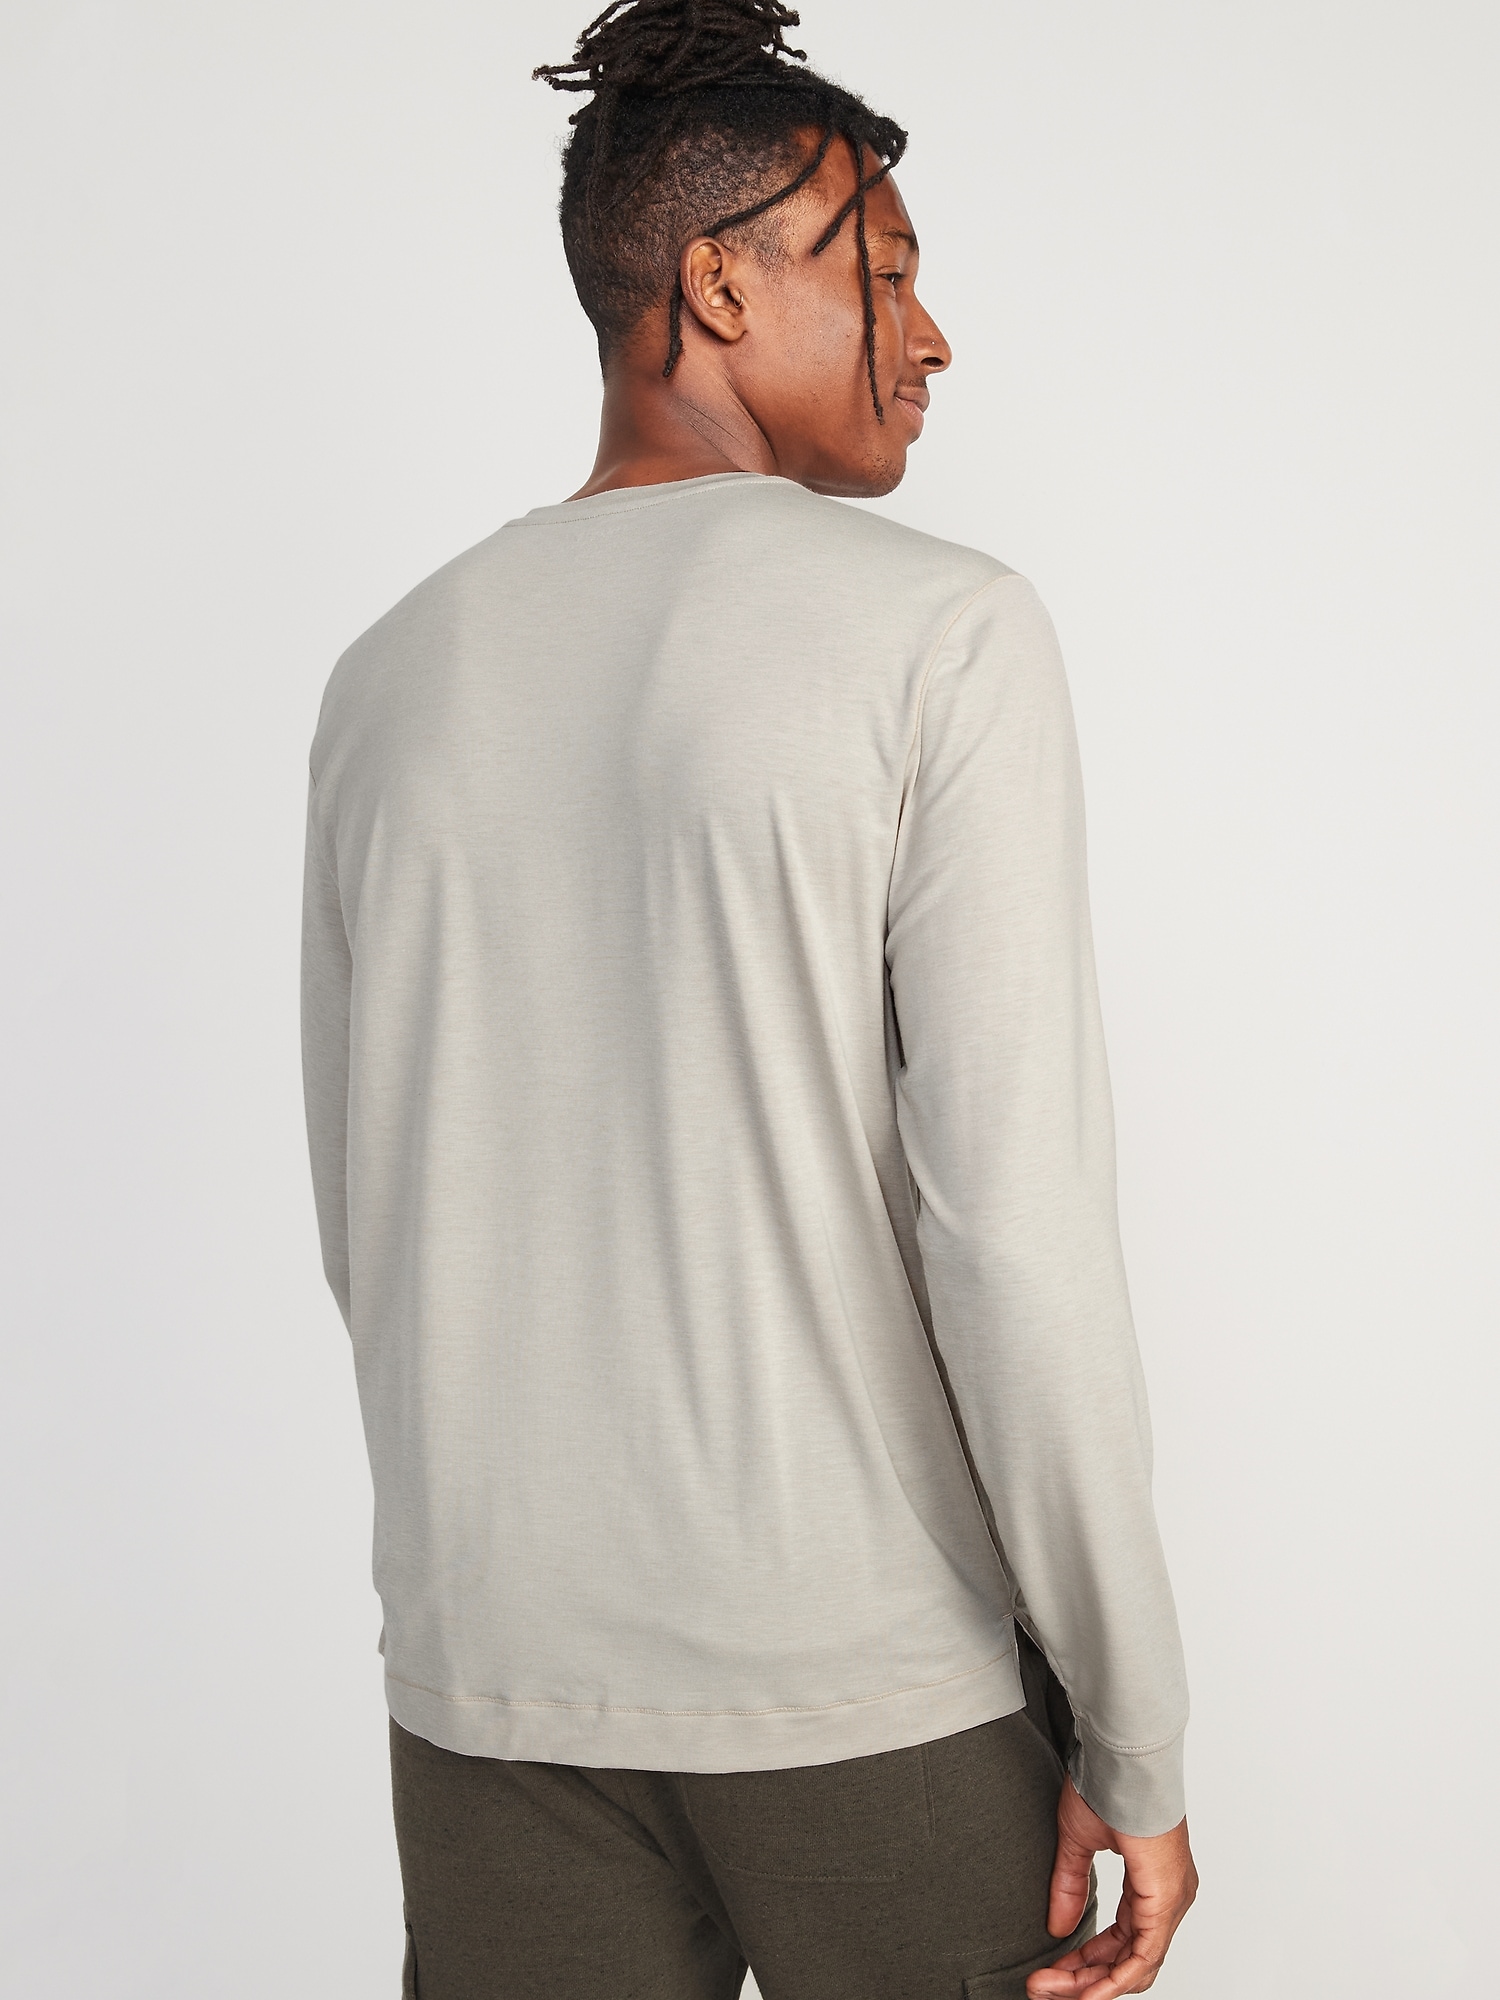 Beyond 4-Way Stretch Long-Sleeve Henley T-Shirt for Men | Old Navy